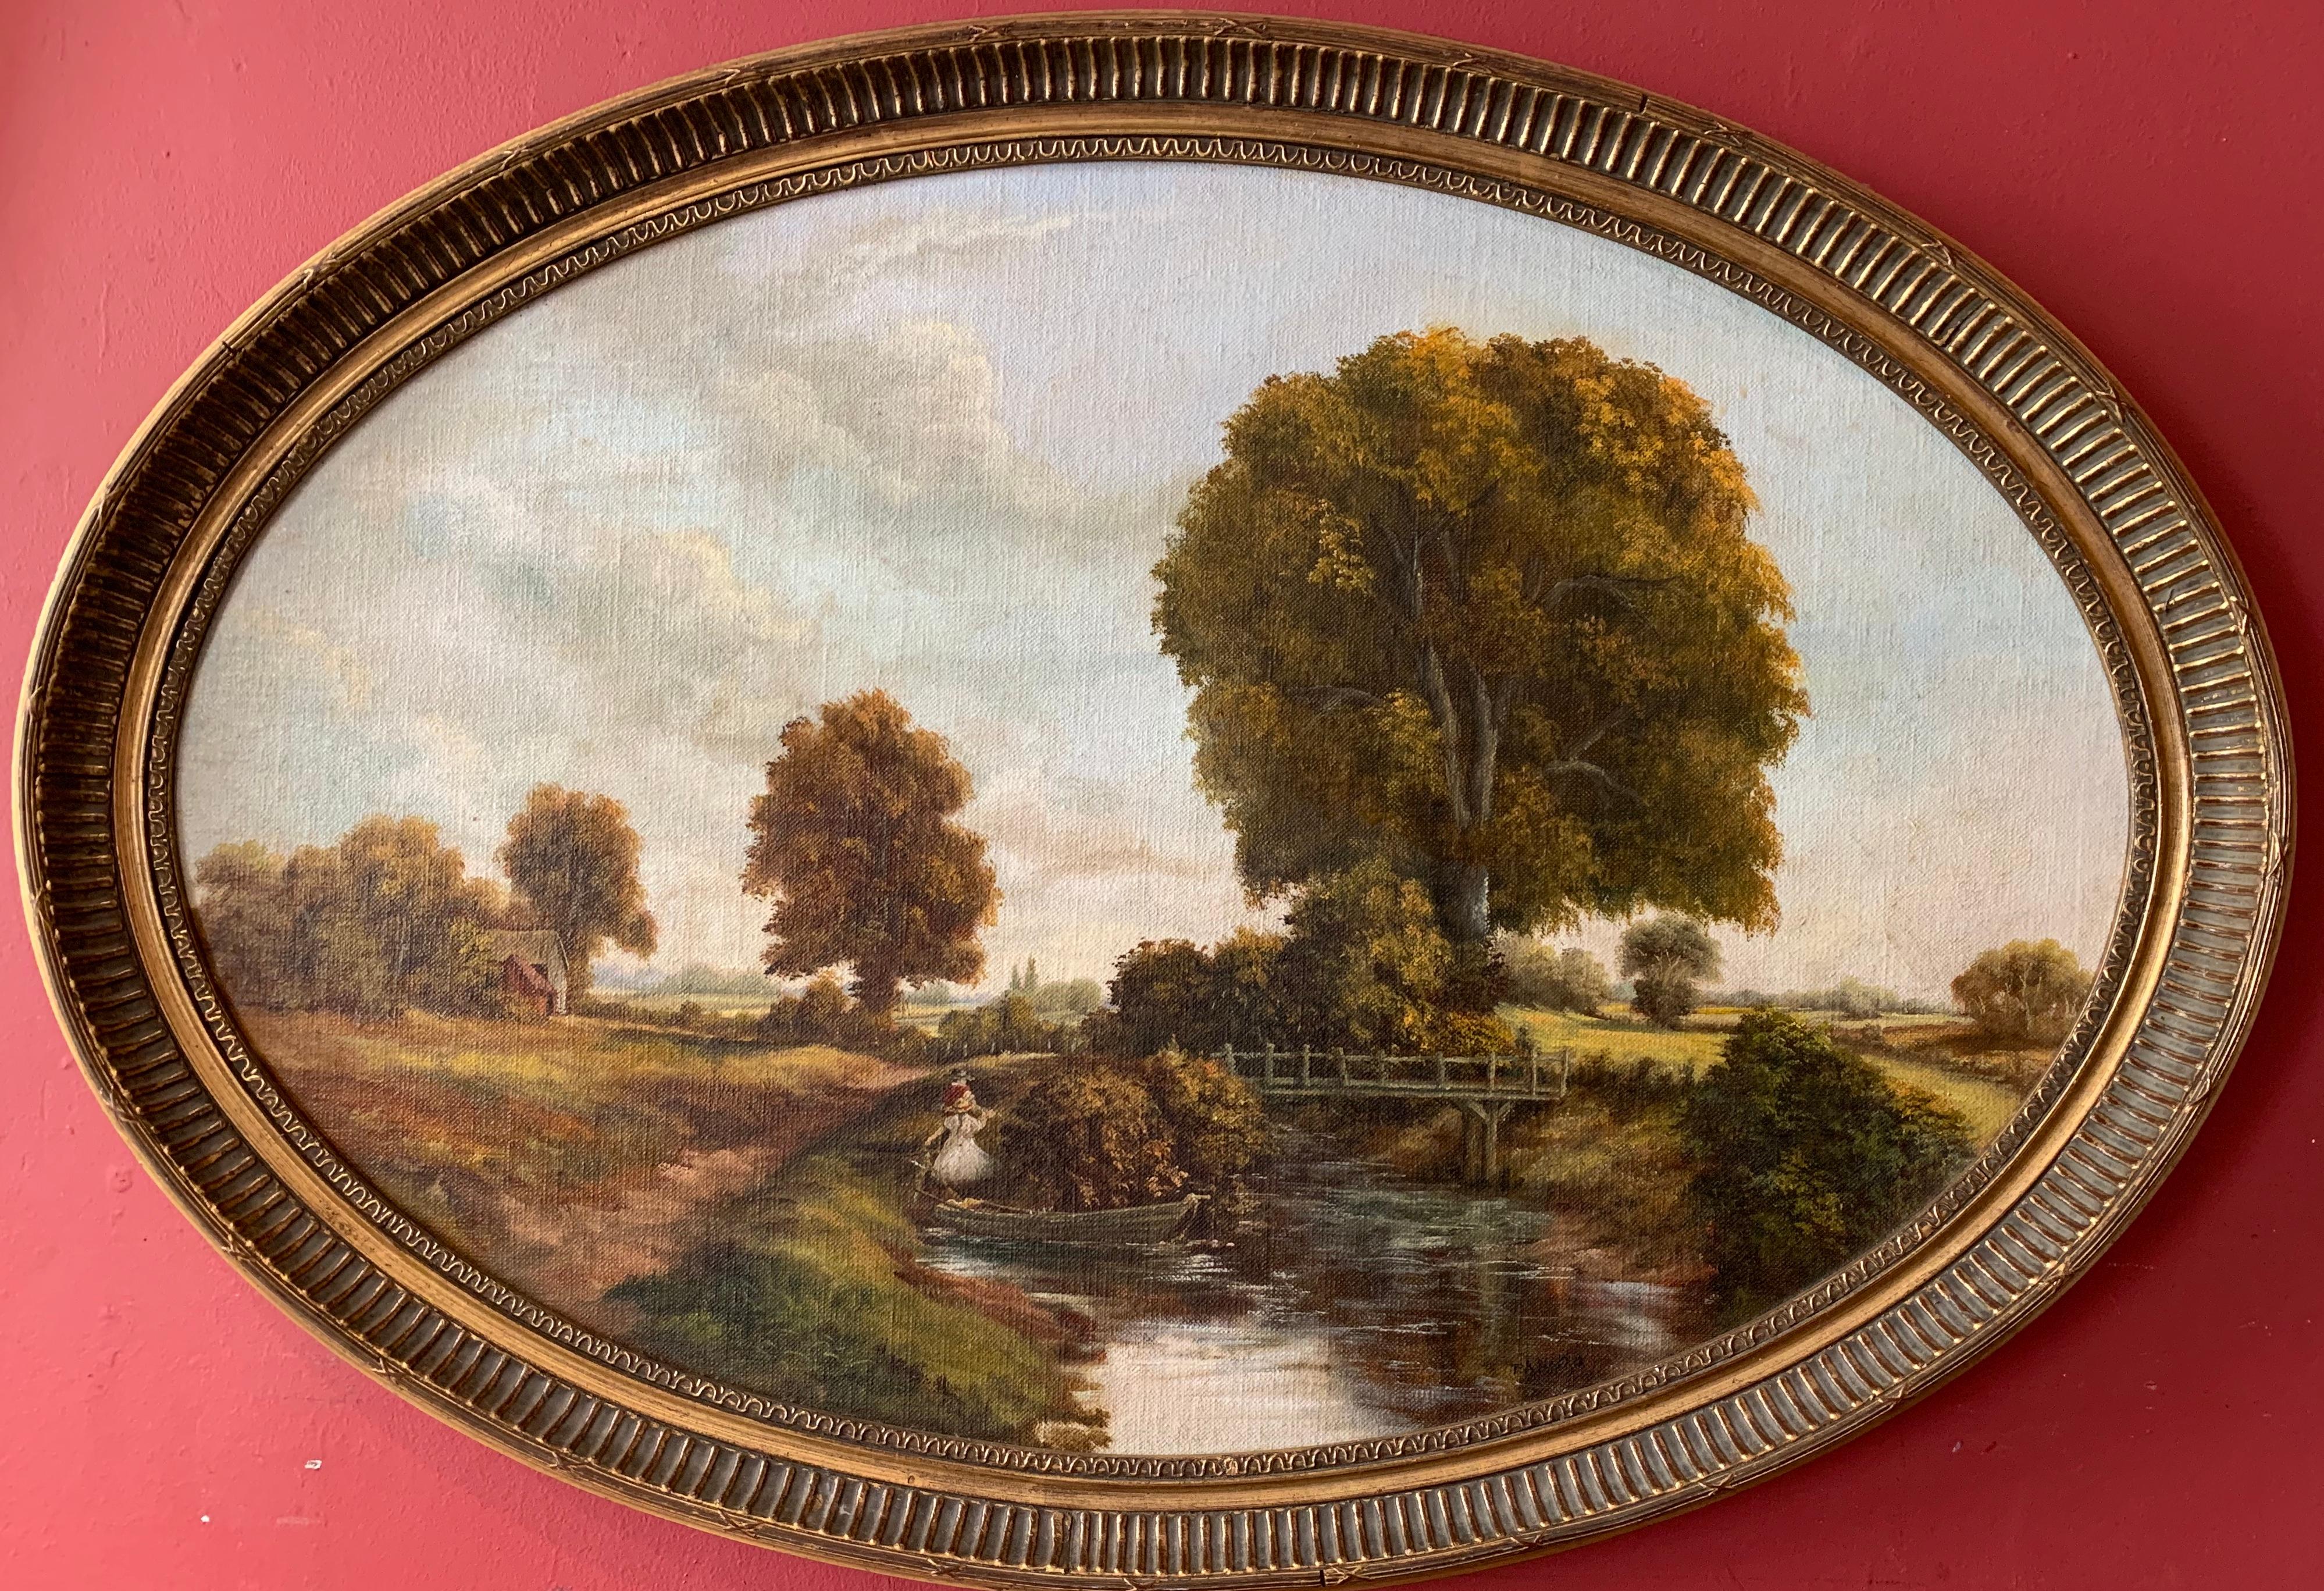 Unknown Figurative Painting - Large Traditional English Rural Oil Painting - Oval Gilt Frame